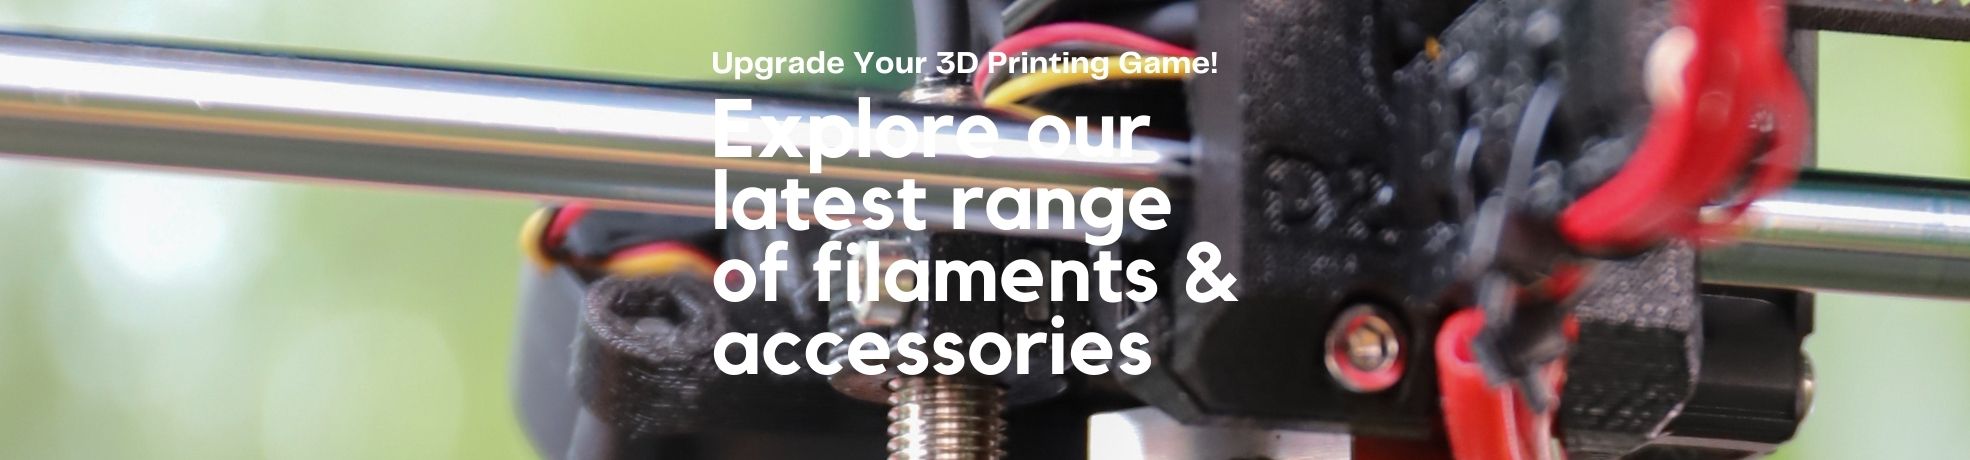 Latest and new filaments and 3d accessories